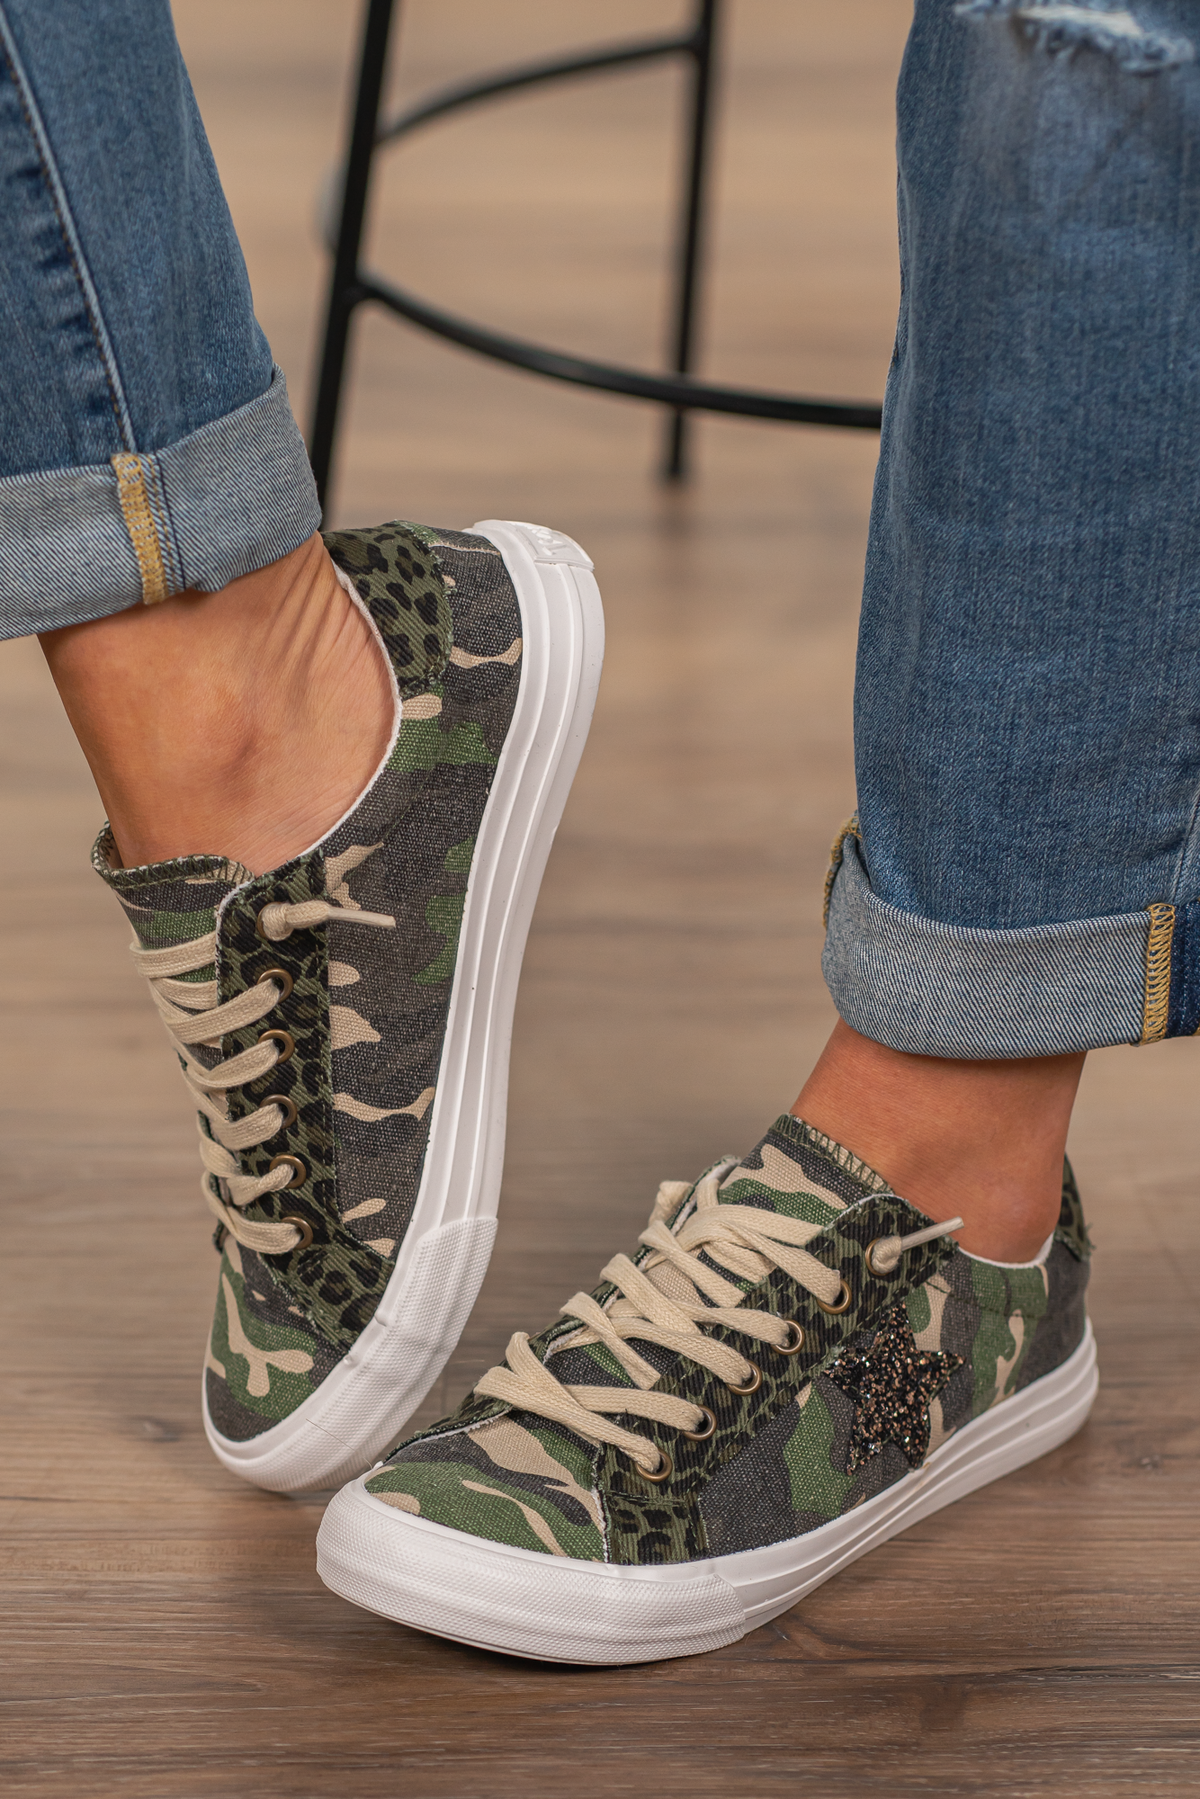 Vintage Styled Sneakers | Very G  These sneakers from Gyspy Jazz are comfortable and bold. Style Name: Cosmic 2 Color: Camo Cut: Sneakers  Rubber Sole Style #: VGSP0126-Sneakers Contact us for any additional measurements or sizing. 